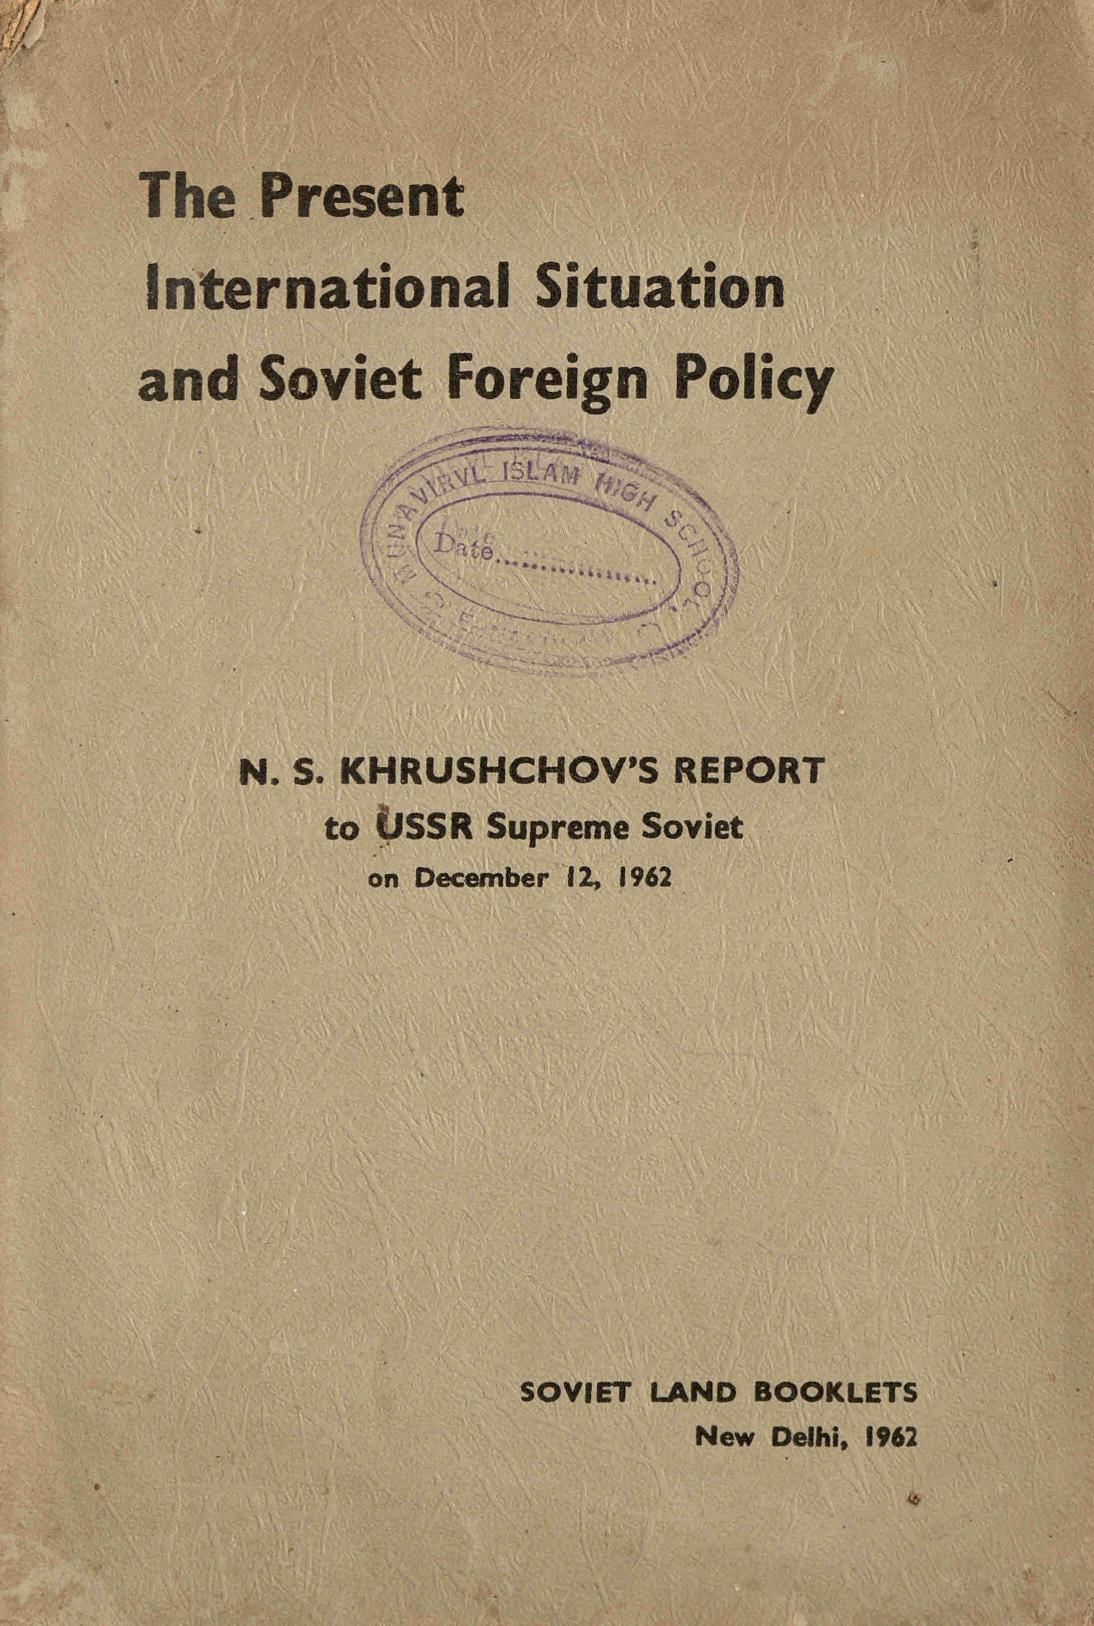 1962 - The Present International Situation and  Soviet Foreign Policy - N. S. Khrushchov